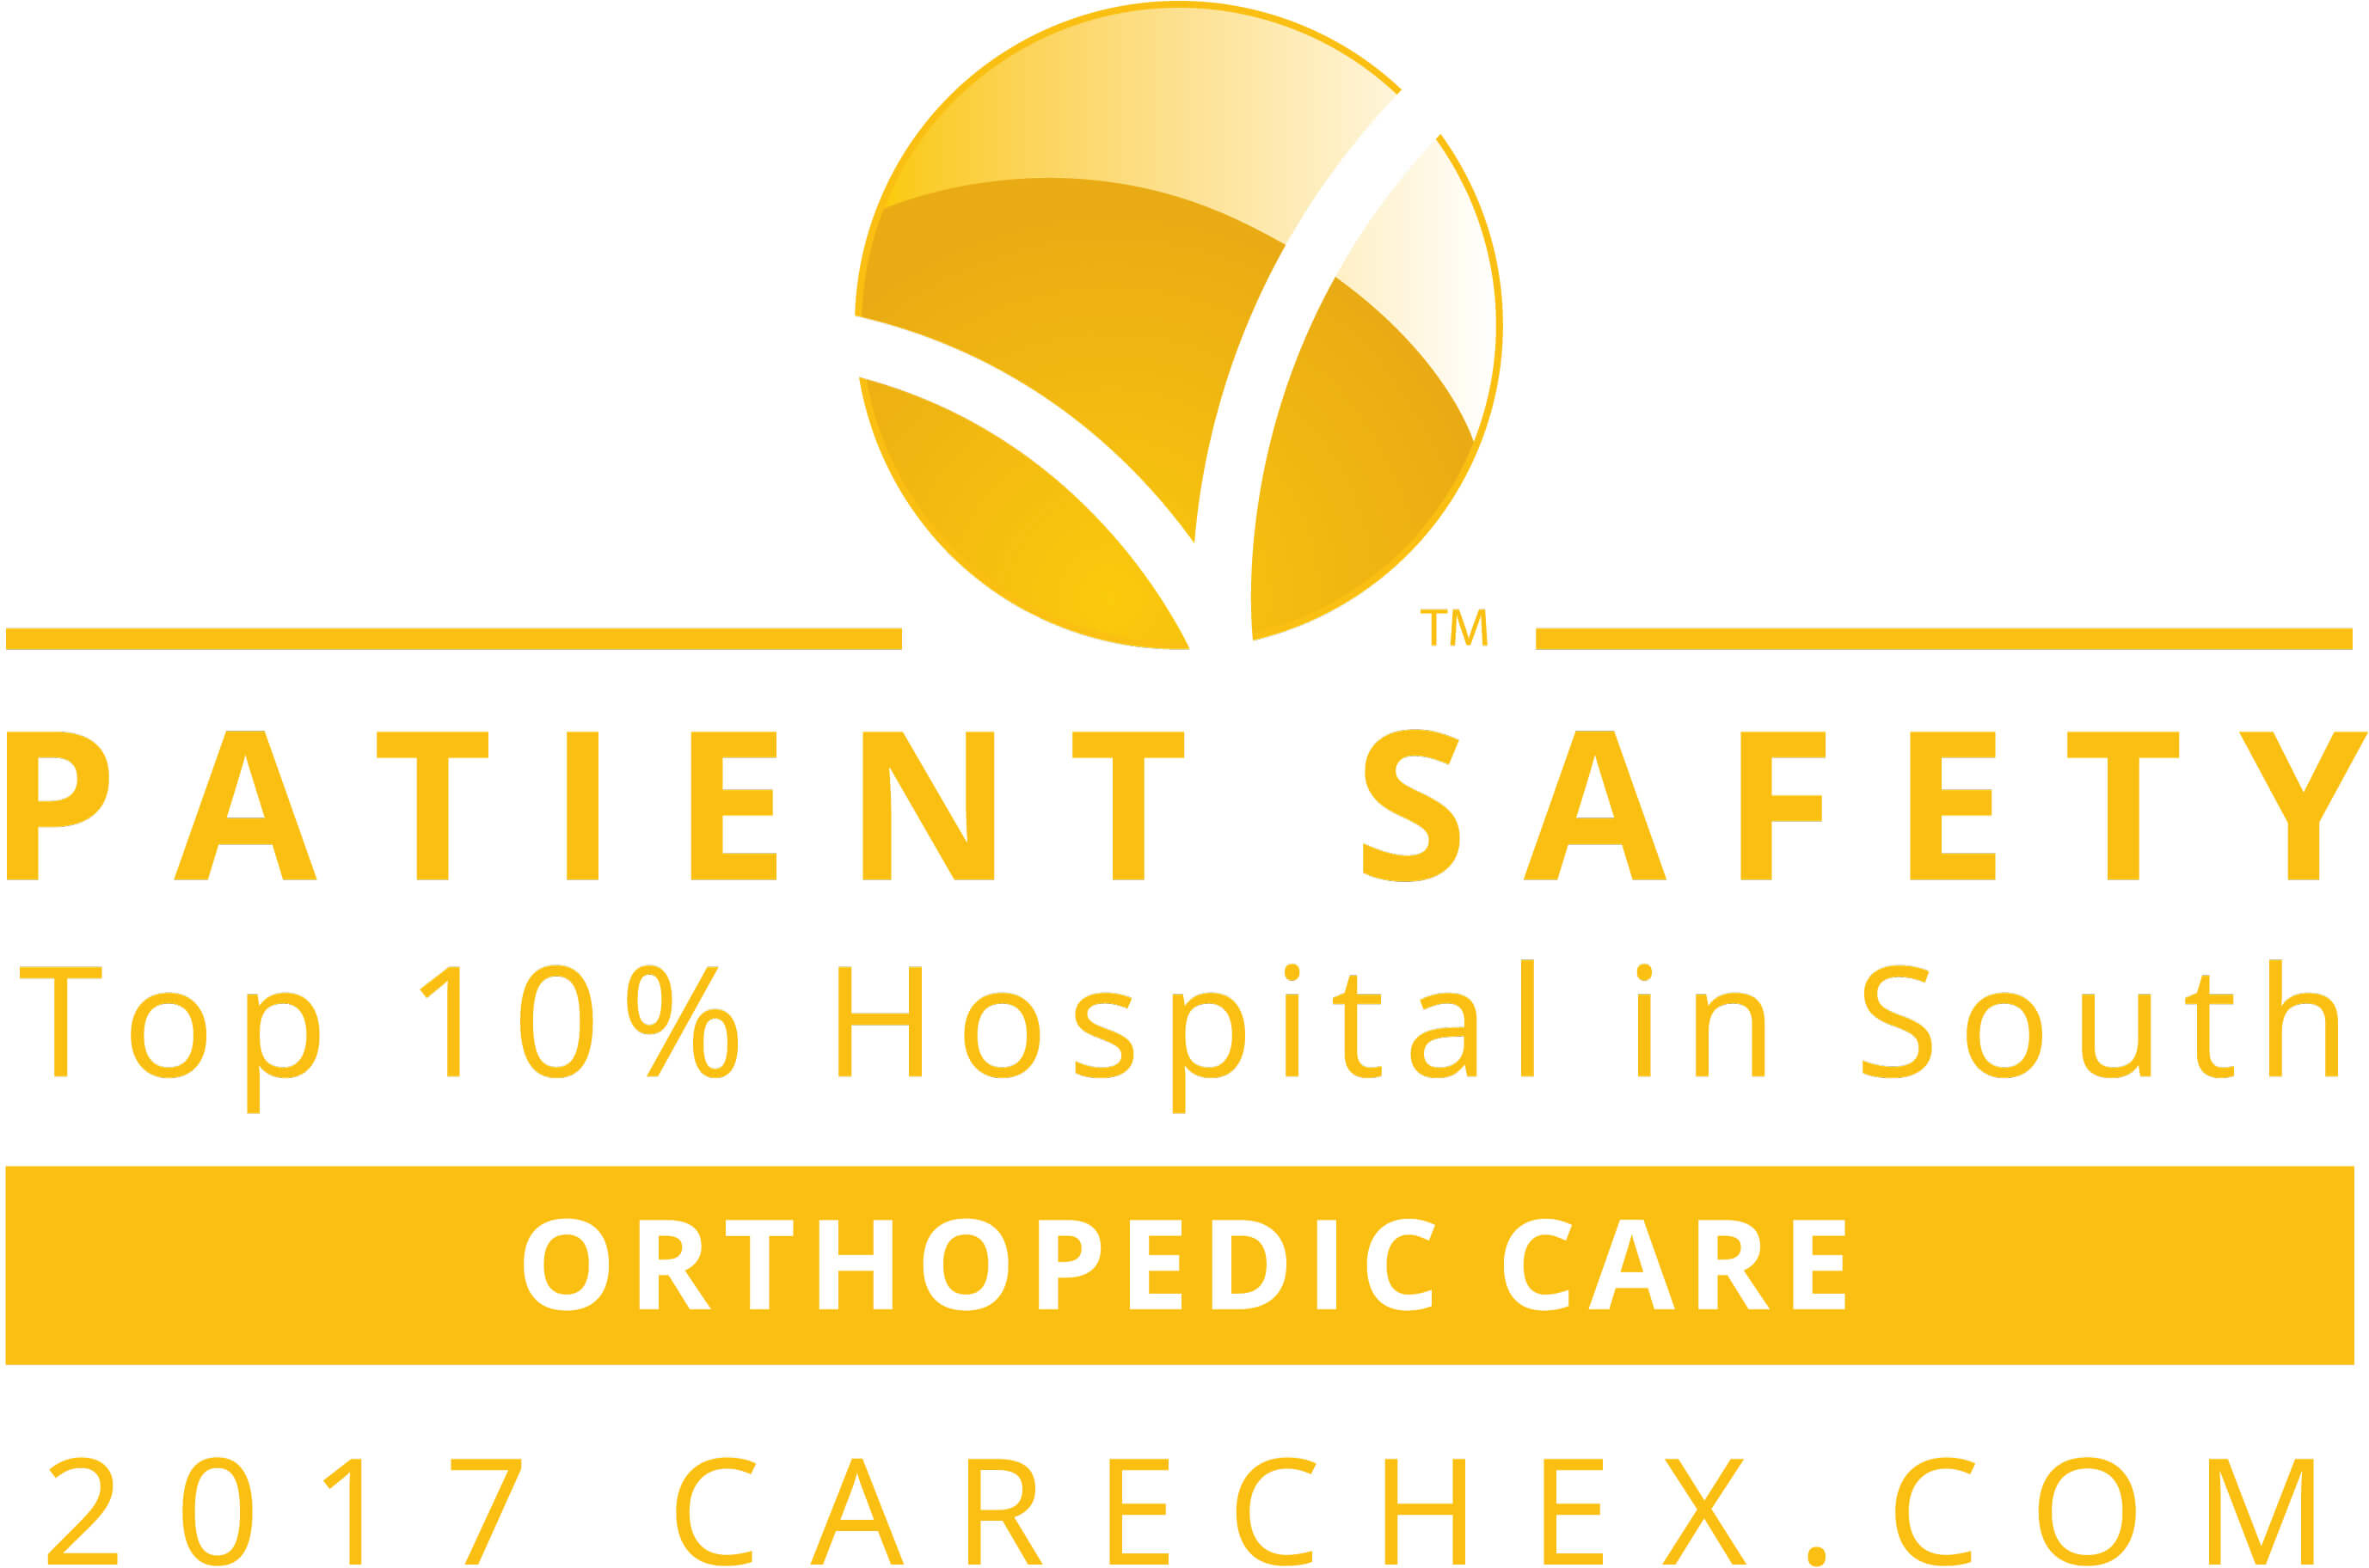 2017 CareCheck Top 10% Hospitals in South for Patient Safety - Orthopedic Care